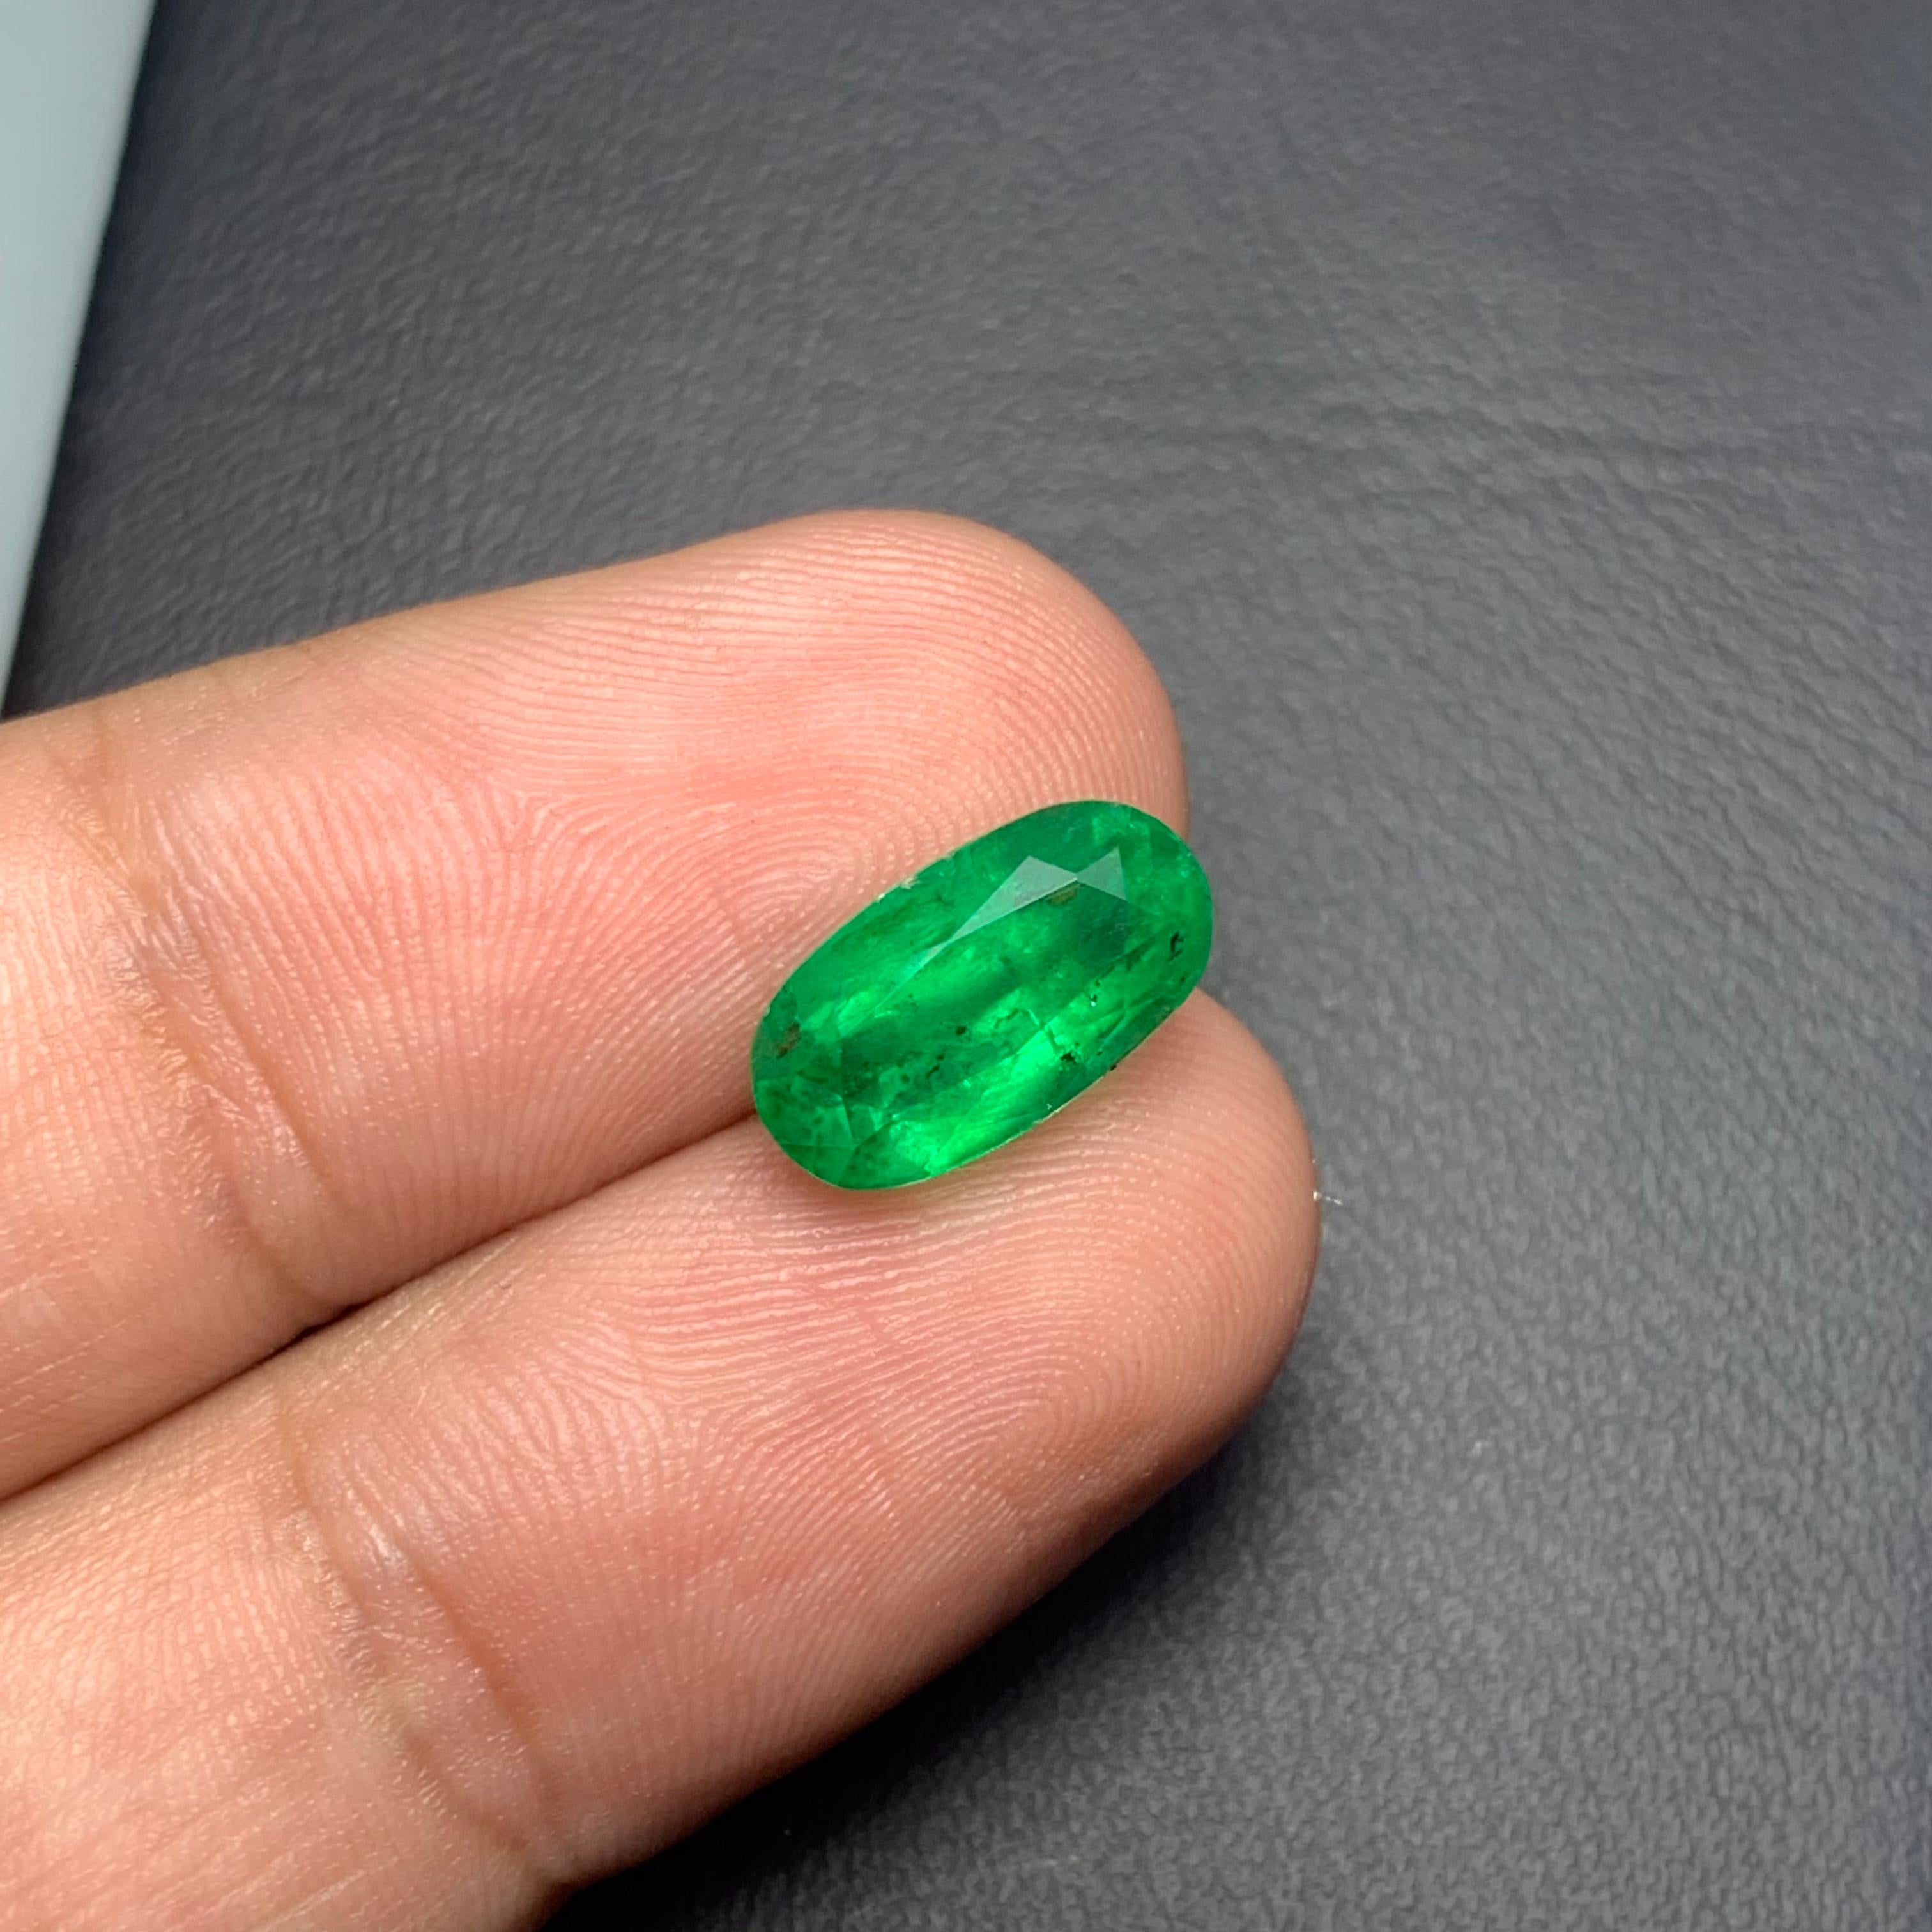 Gorgeous Natural Vivid Green Emerald Oval Shape from Pakistan Mine 3.10 Carat 11